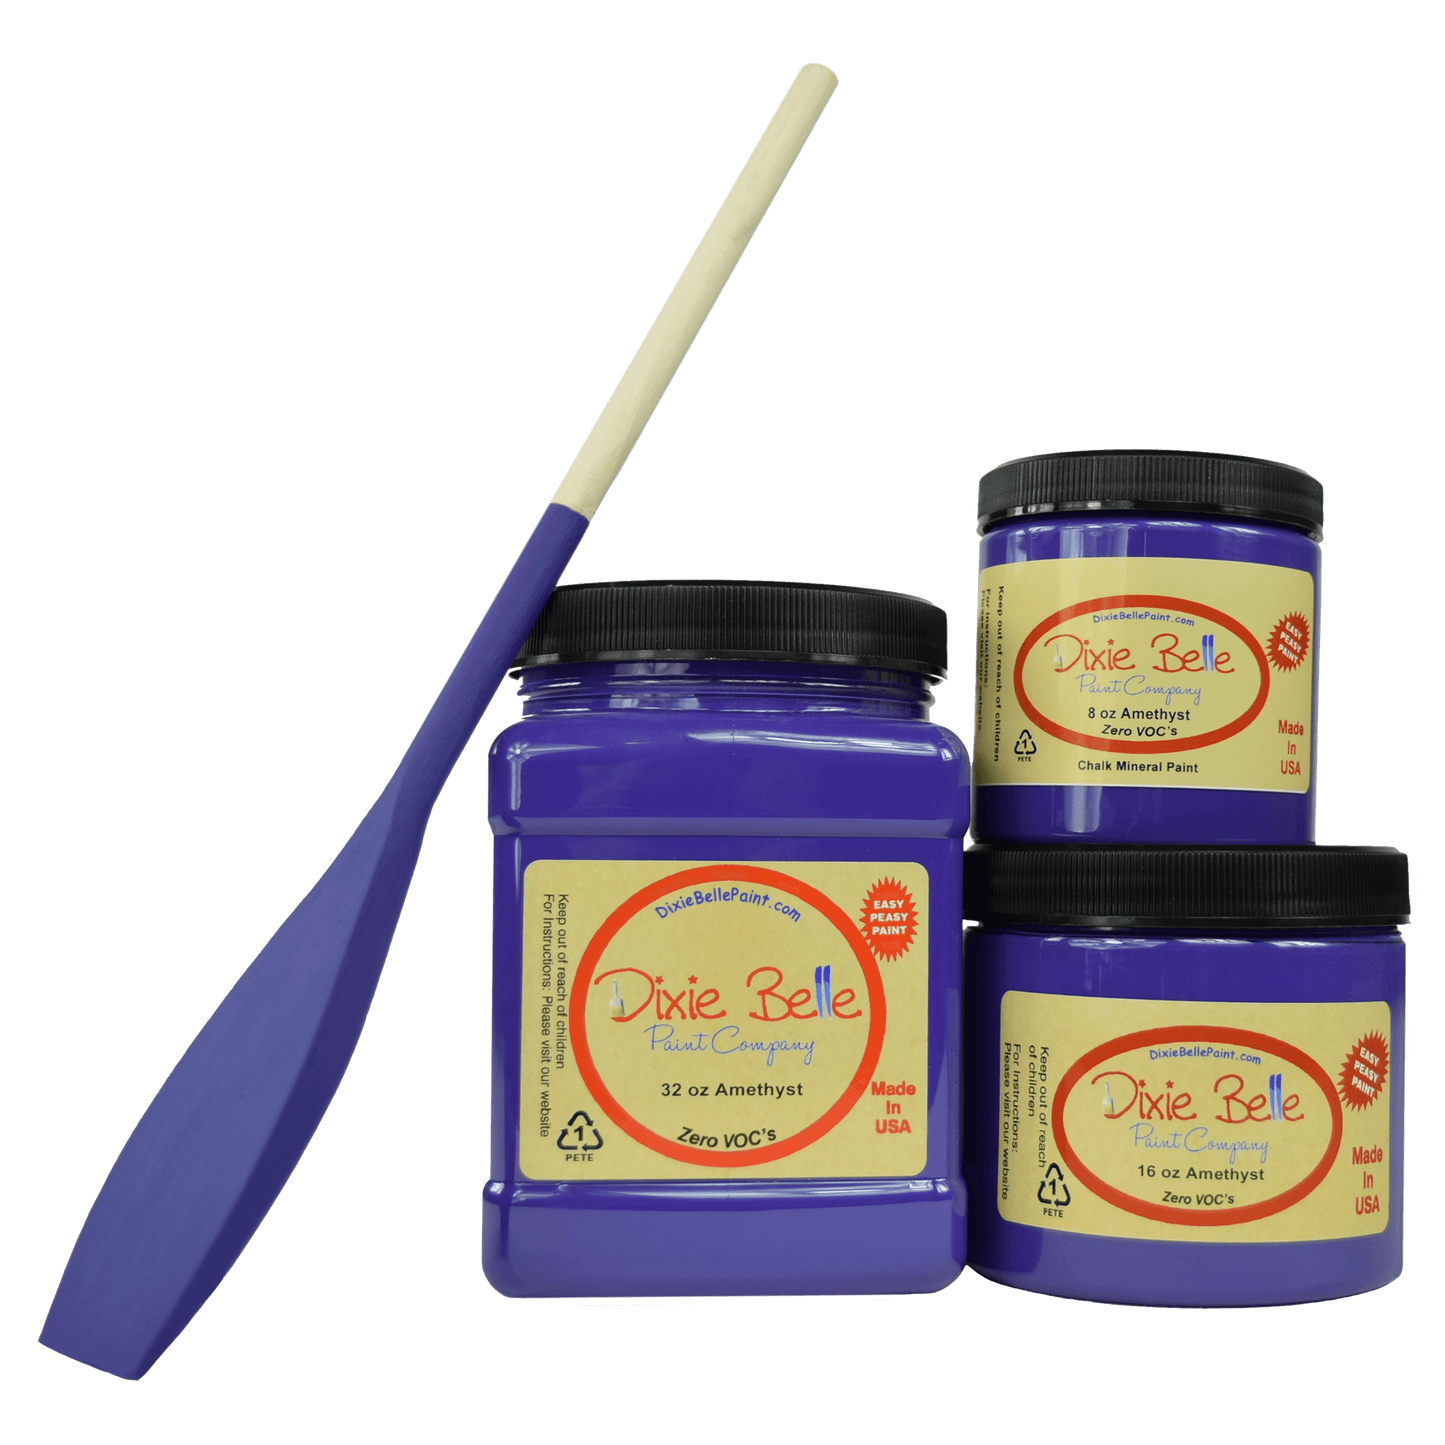 Amethyst Dixie Belle Chalk Mineral Paint - Same Day Shipping - No VOC - Chalk Paint for Furniture and Cabinets - Water Based Paint - Best Chalk Paint - belleandbeau850